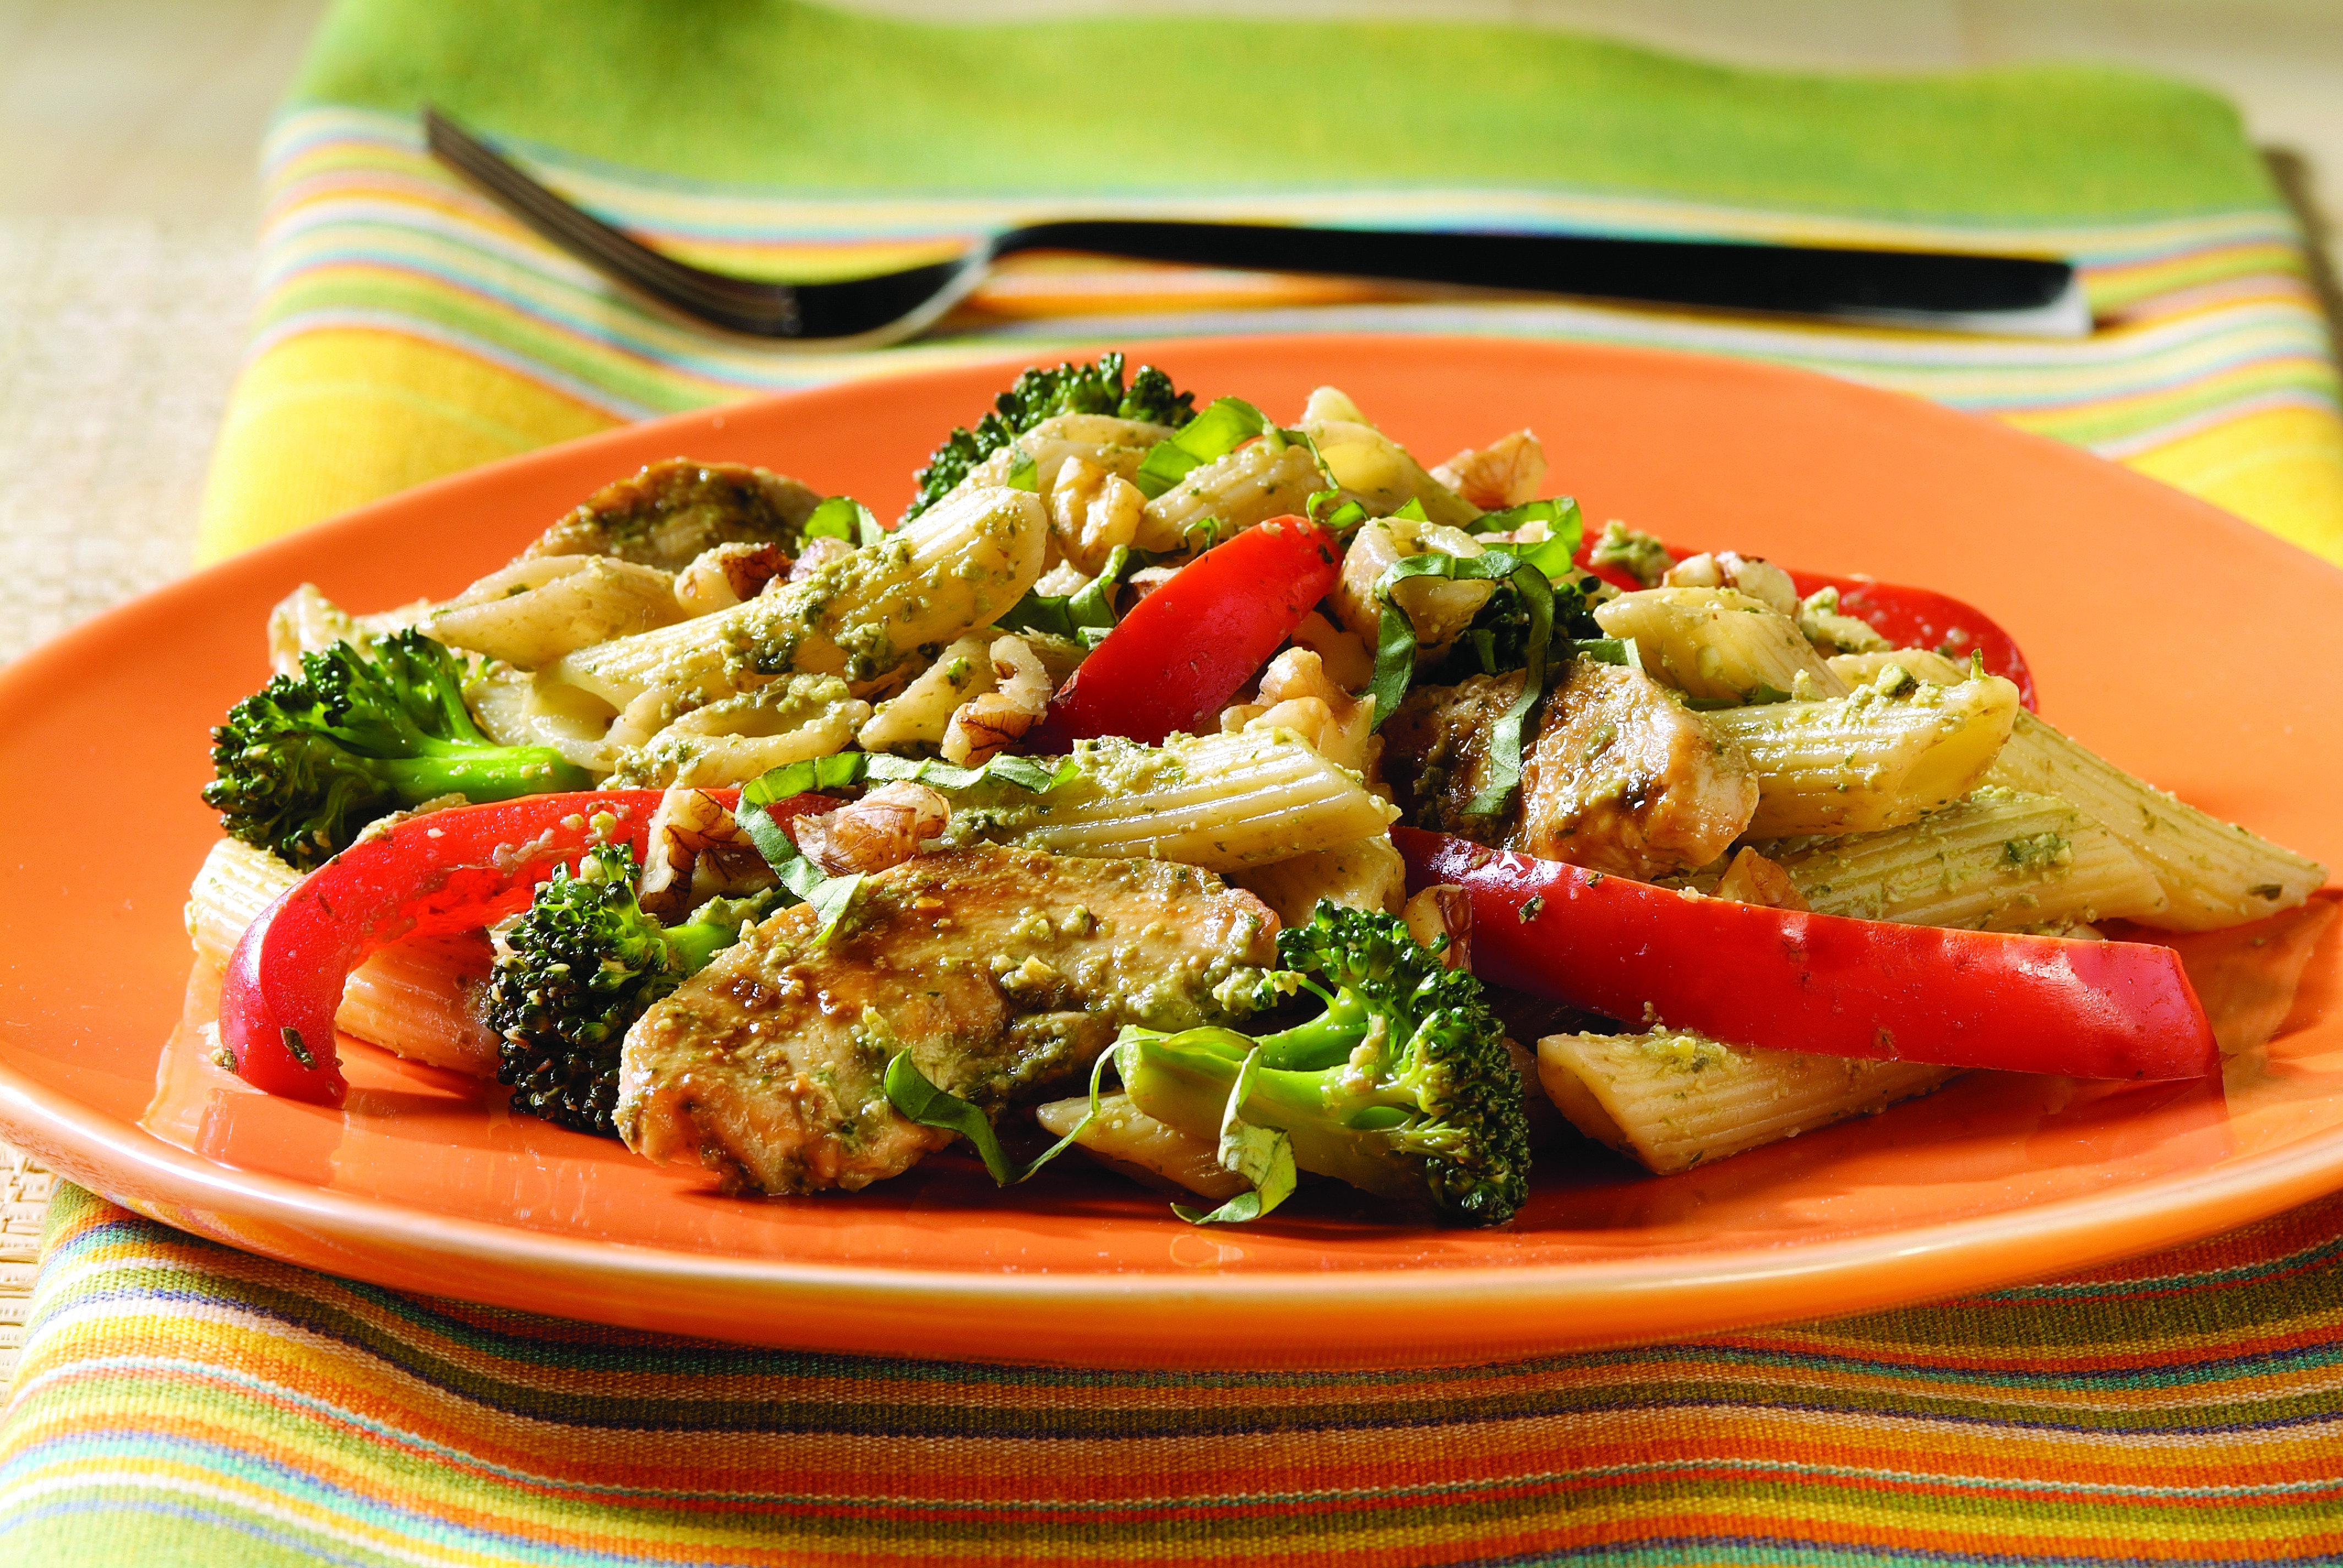 Penne with Chicken and Vegetables in Basil Sauce